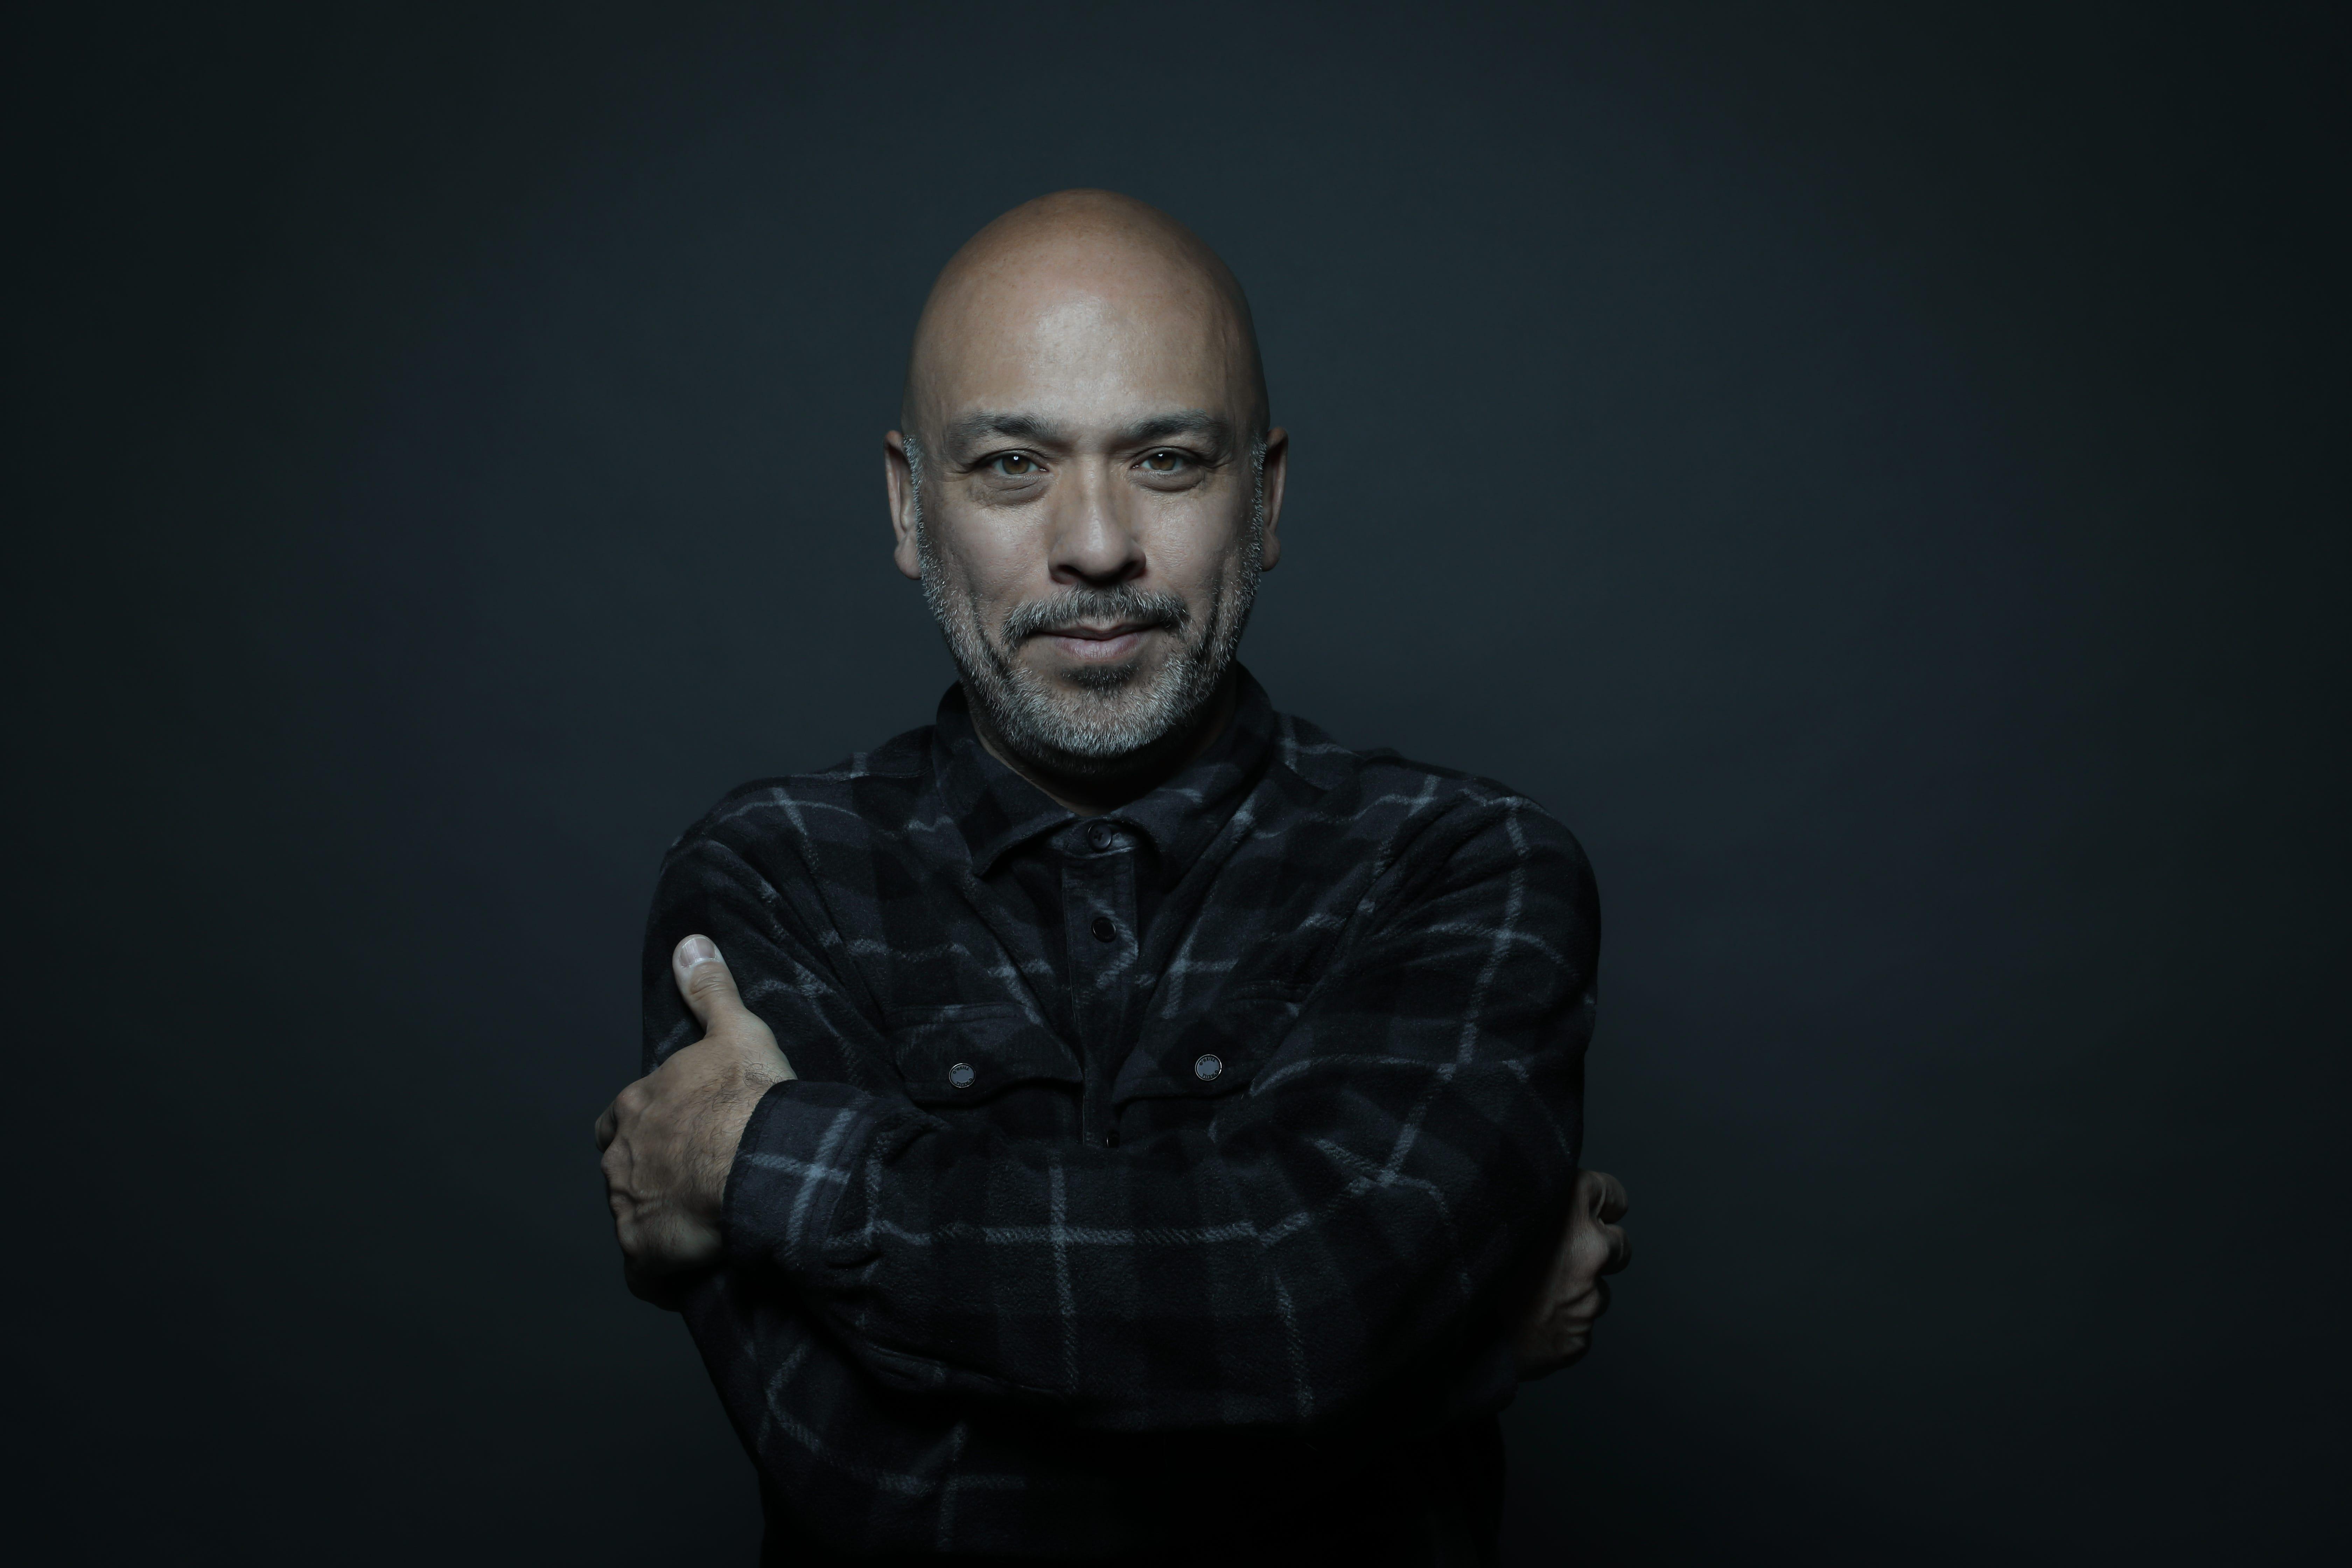 Comedian Jo Koy will perform April 30 at the Weidner Center.